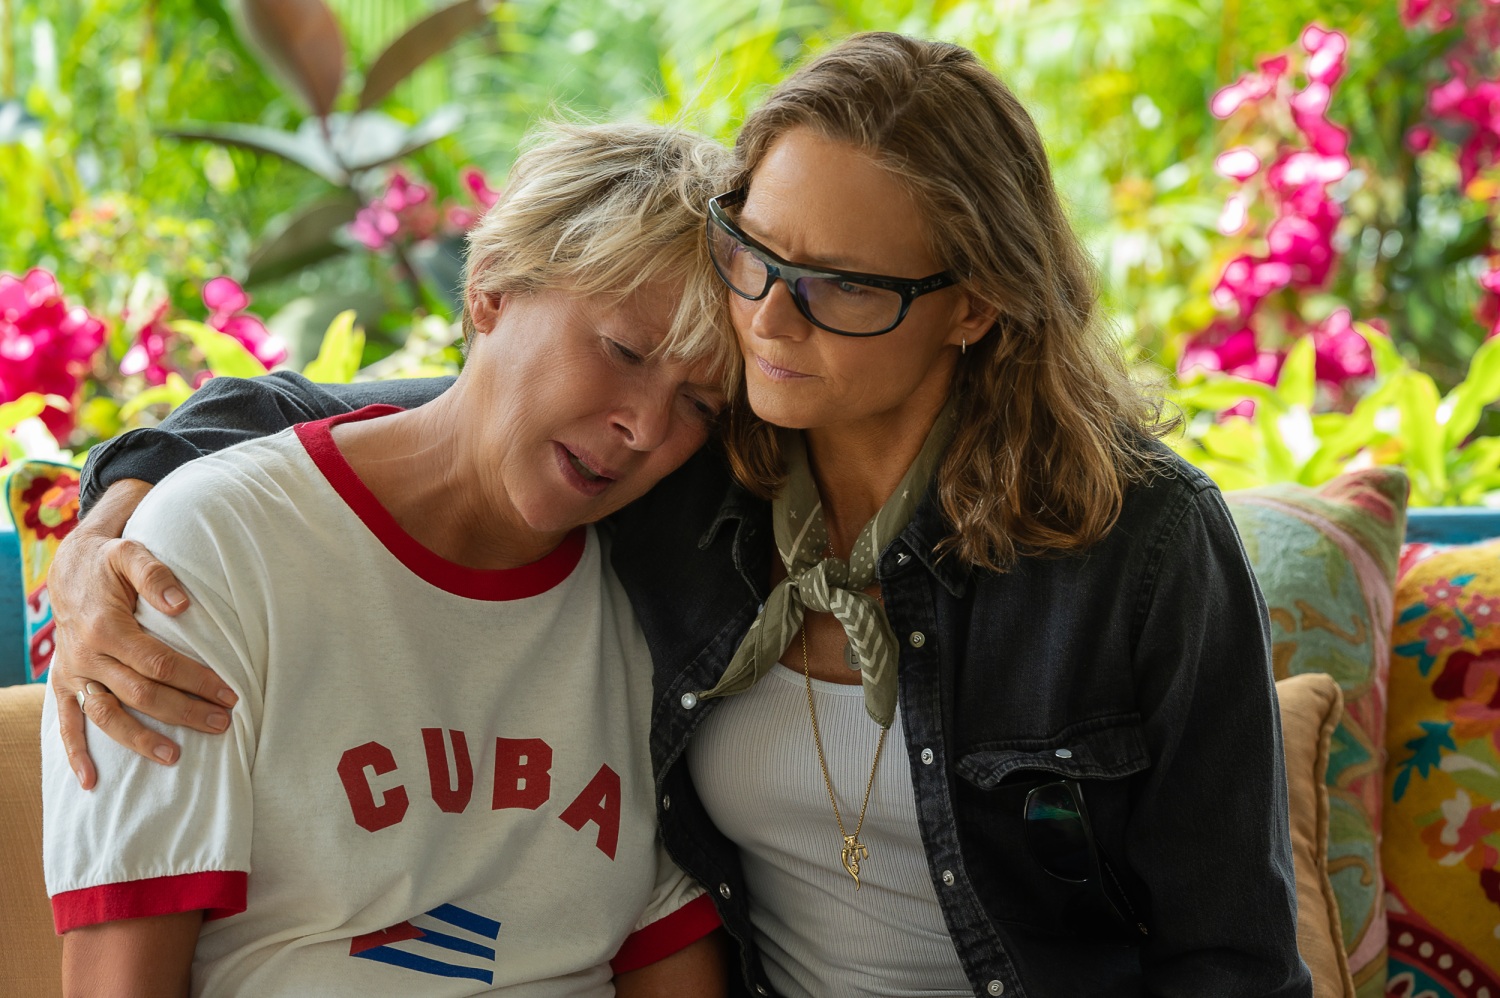 Netflix's Diana Nyad biopic: What's fact and what's fiction? - Los